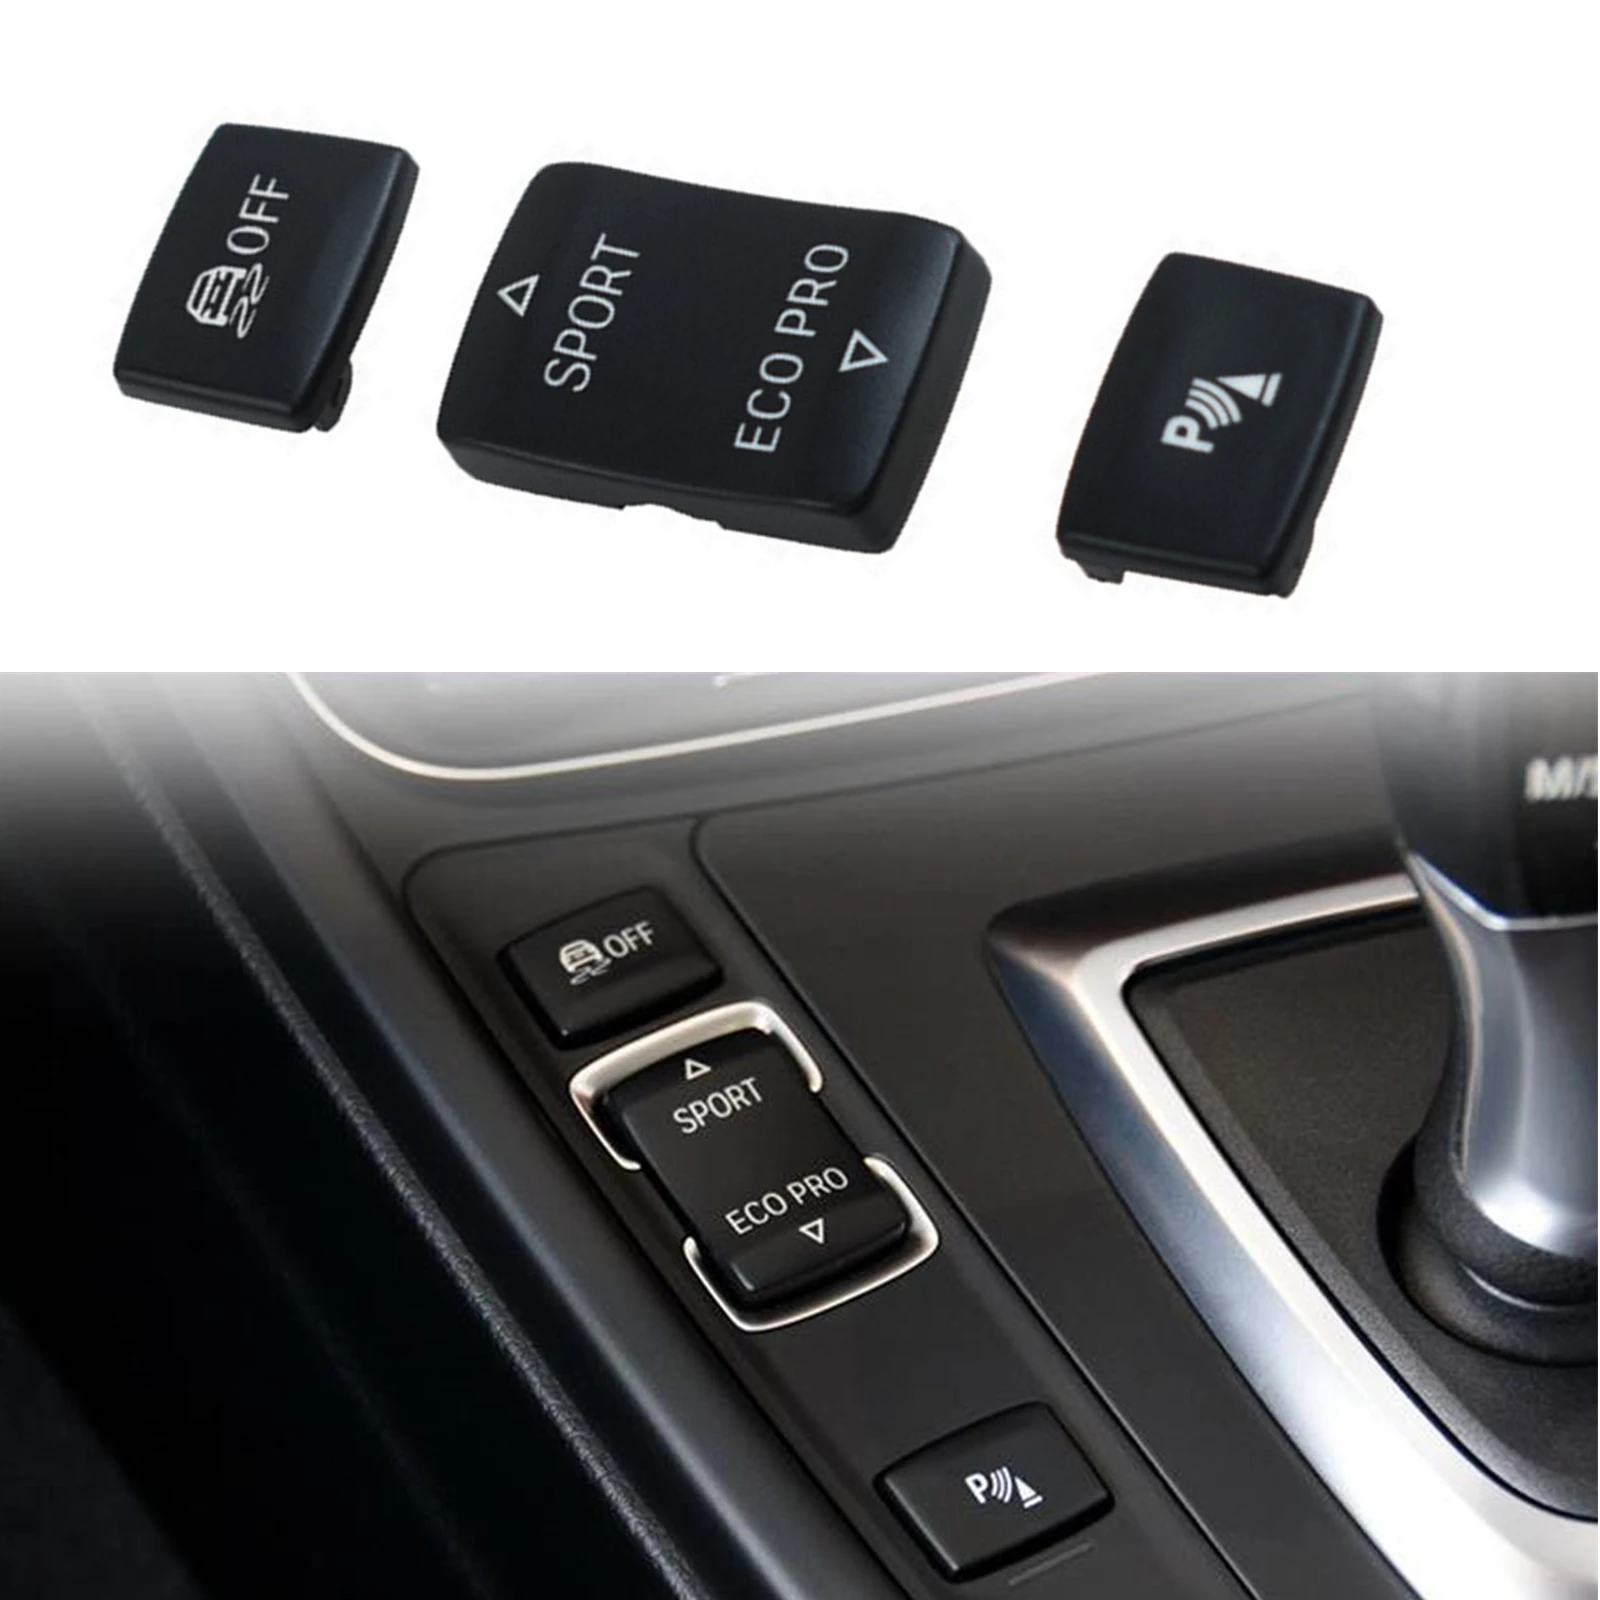 

For BMW 1 2 3 4 Series F32 F36 2013-2018 GT F30 Car ESP OFF Electric Switch Button Repair SPORT ECO PRO P Cover Key Knob Kit